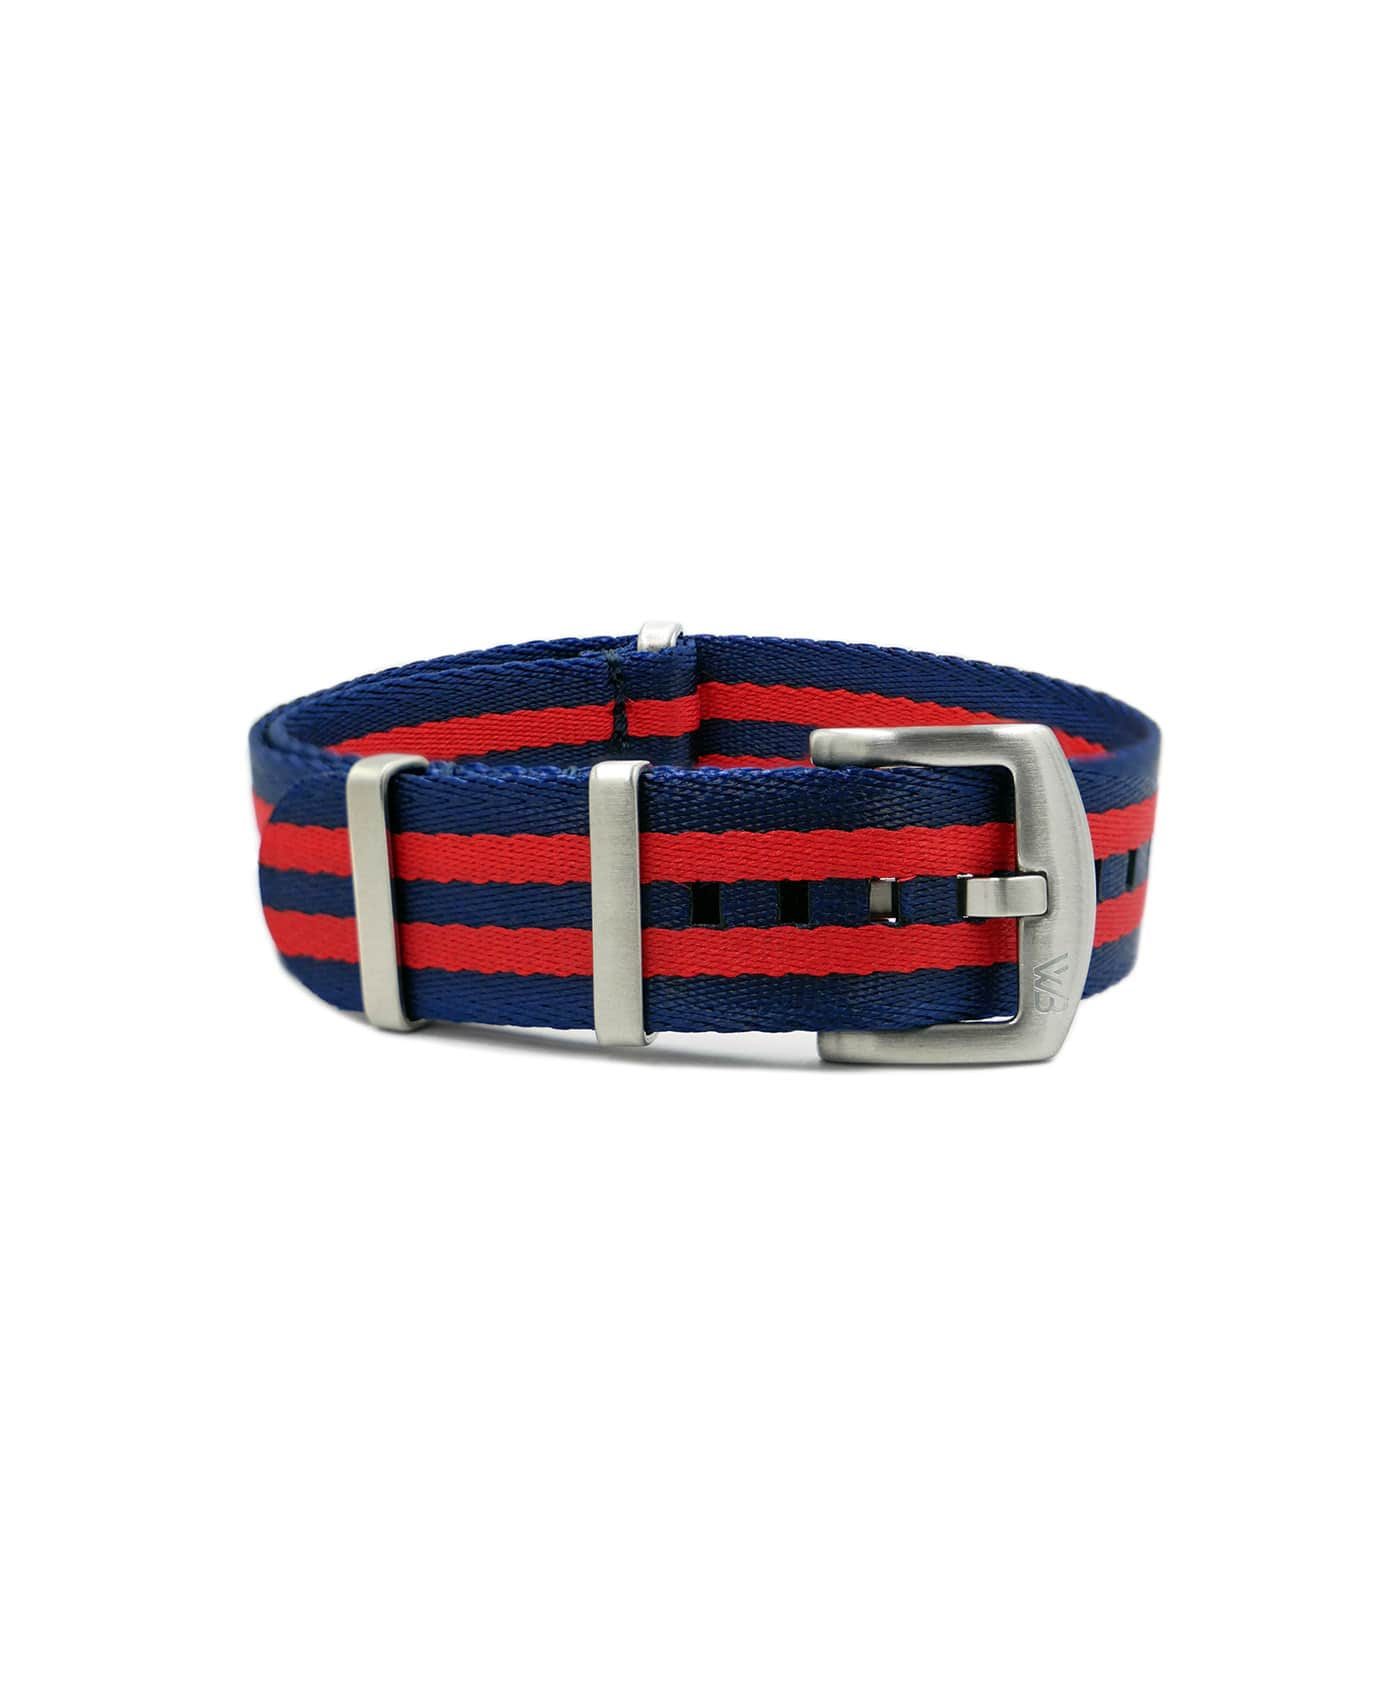 Premium_Nato-straps brushed_red blue striped_front